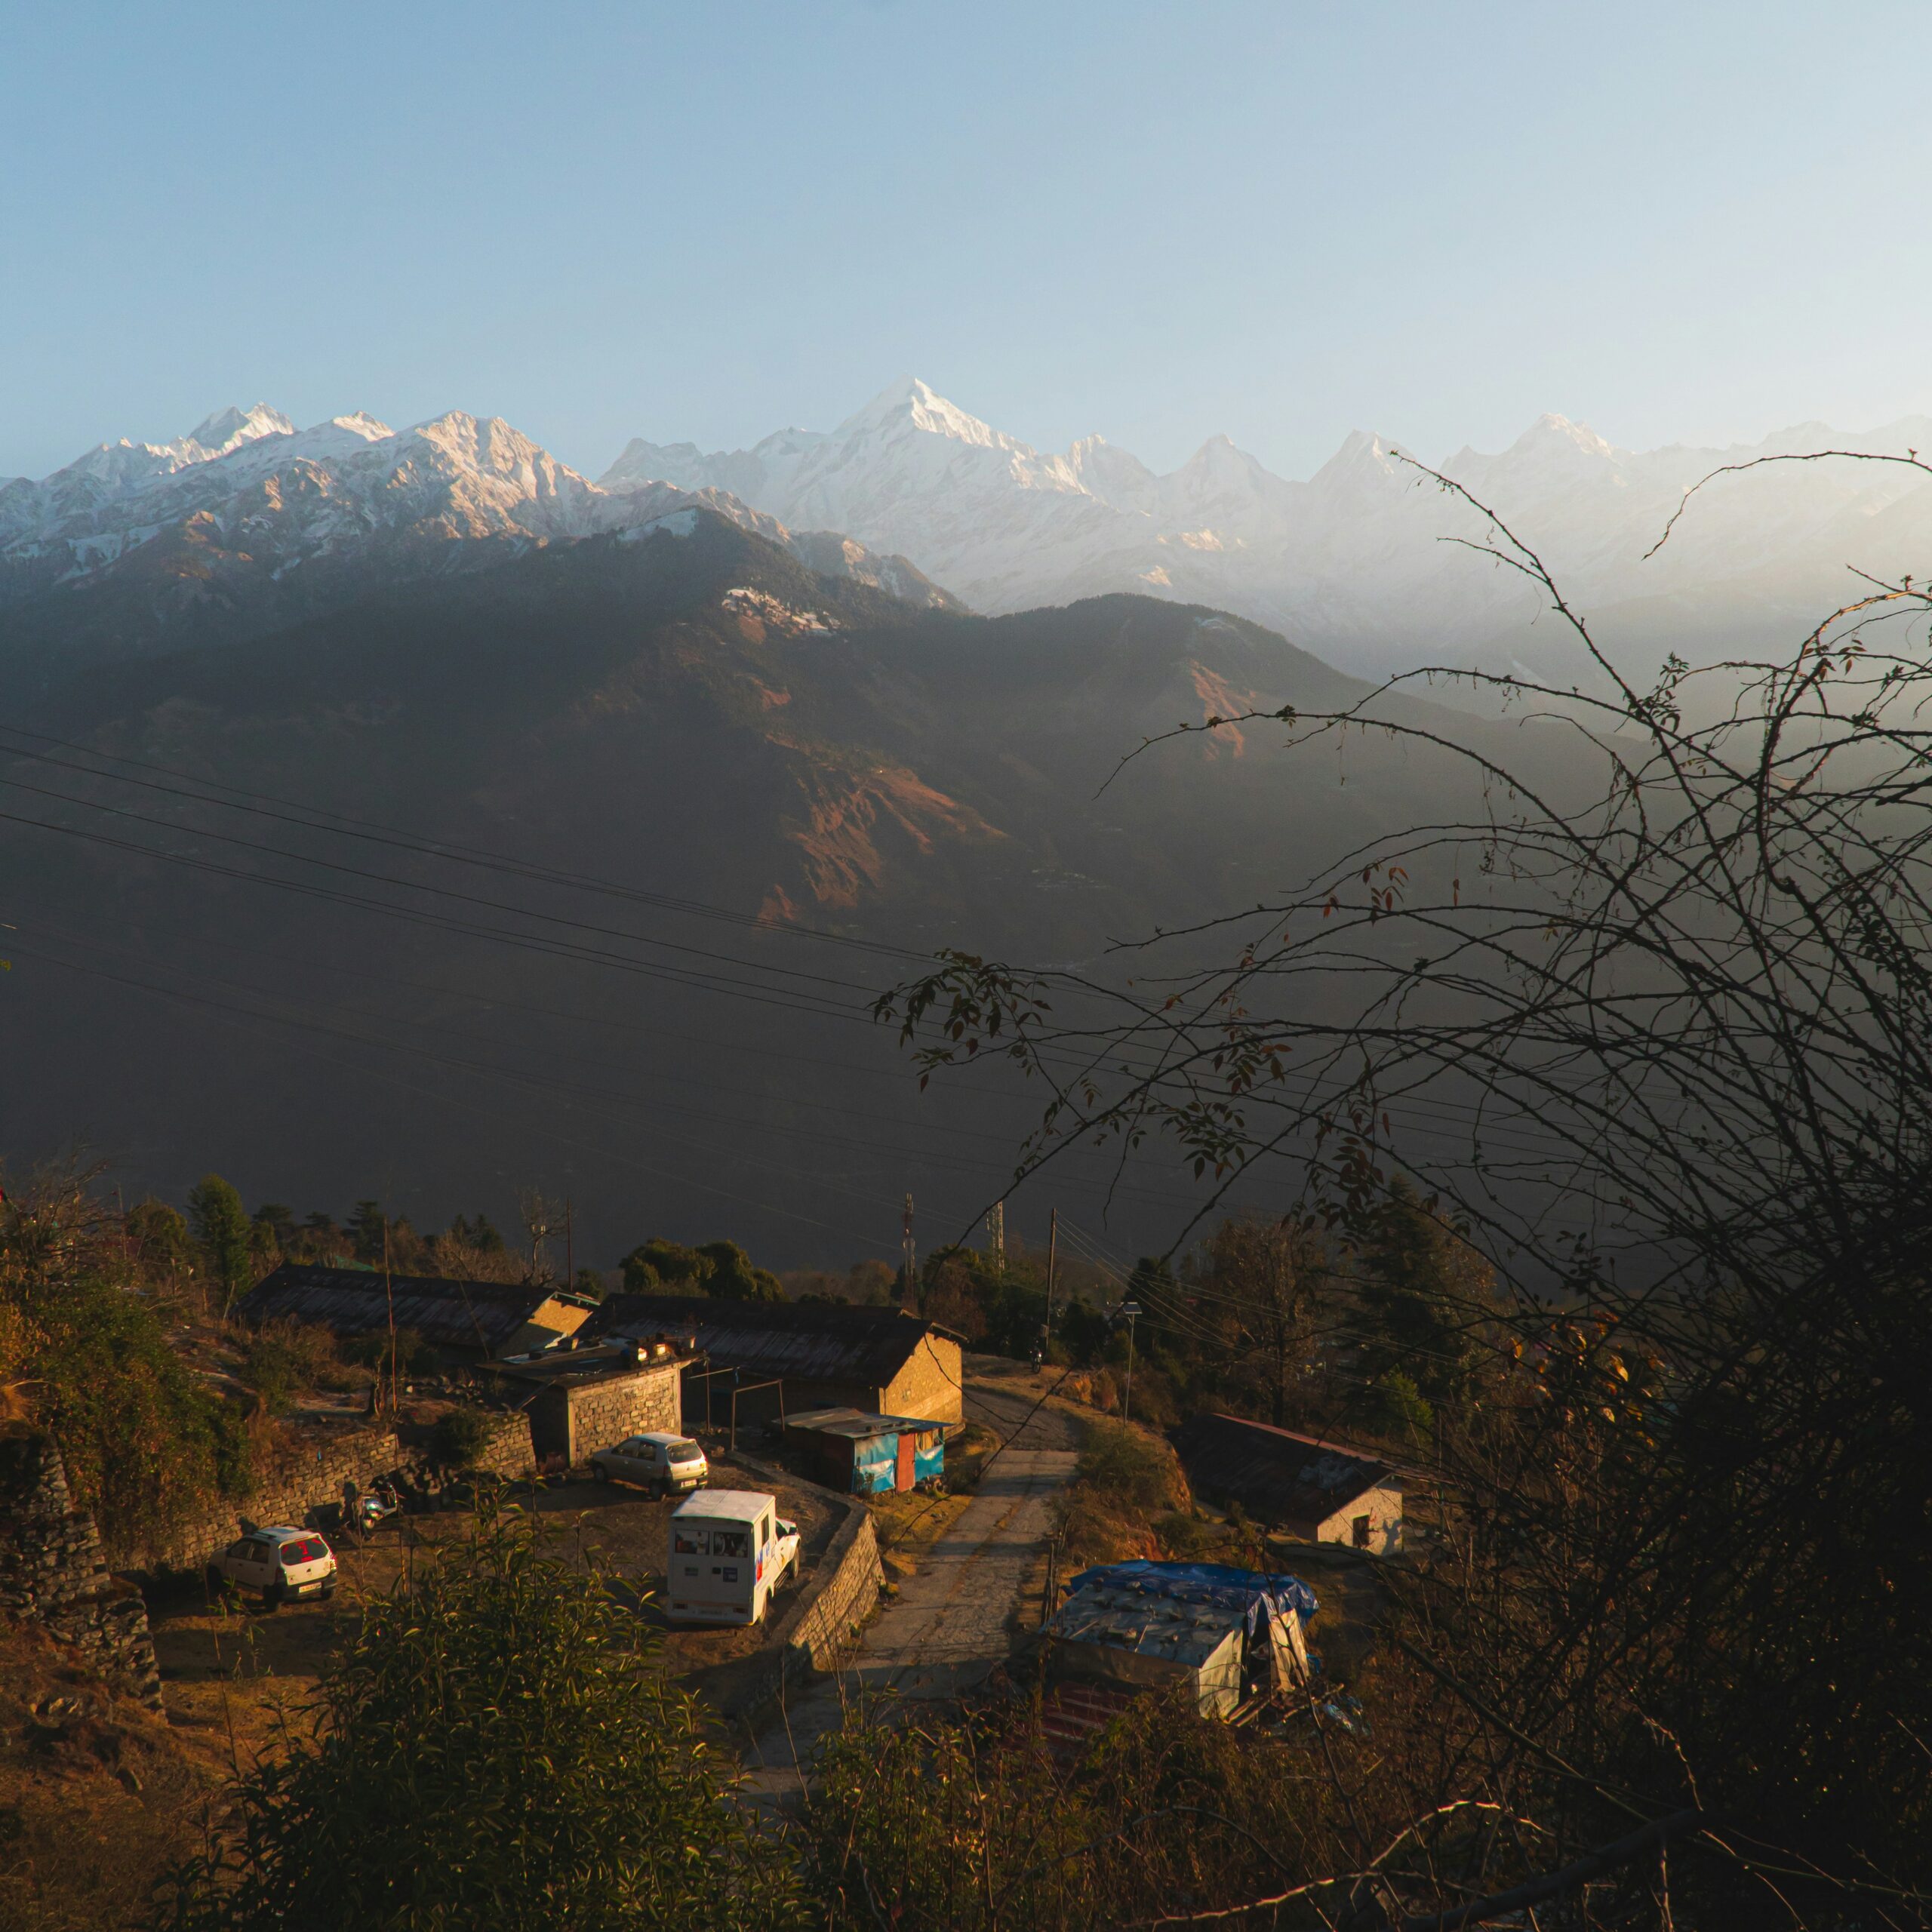 a view of a mountain range with a village in the foreground